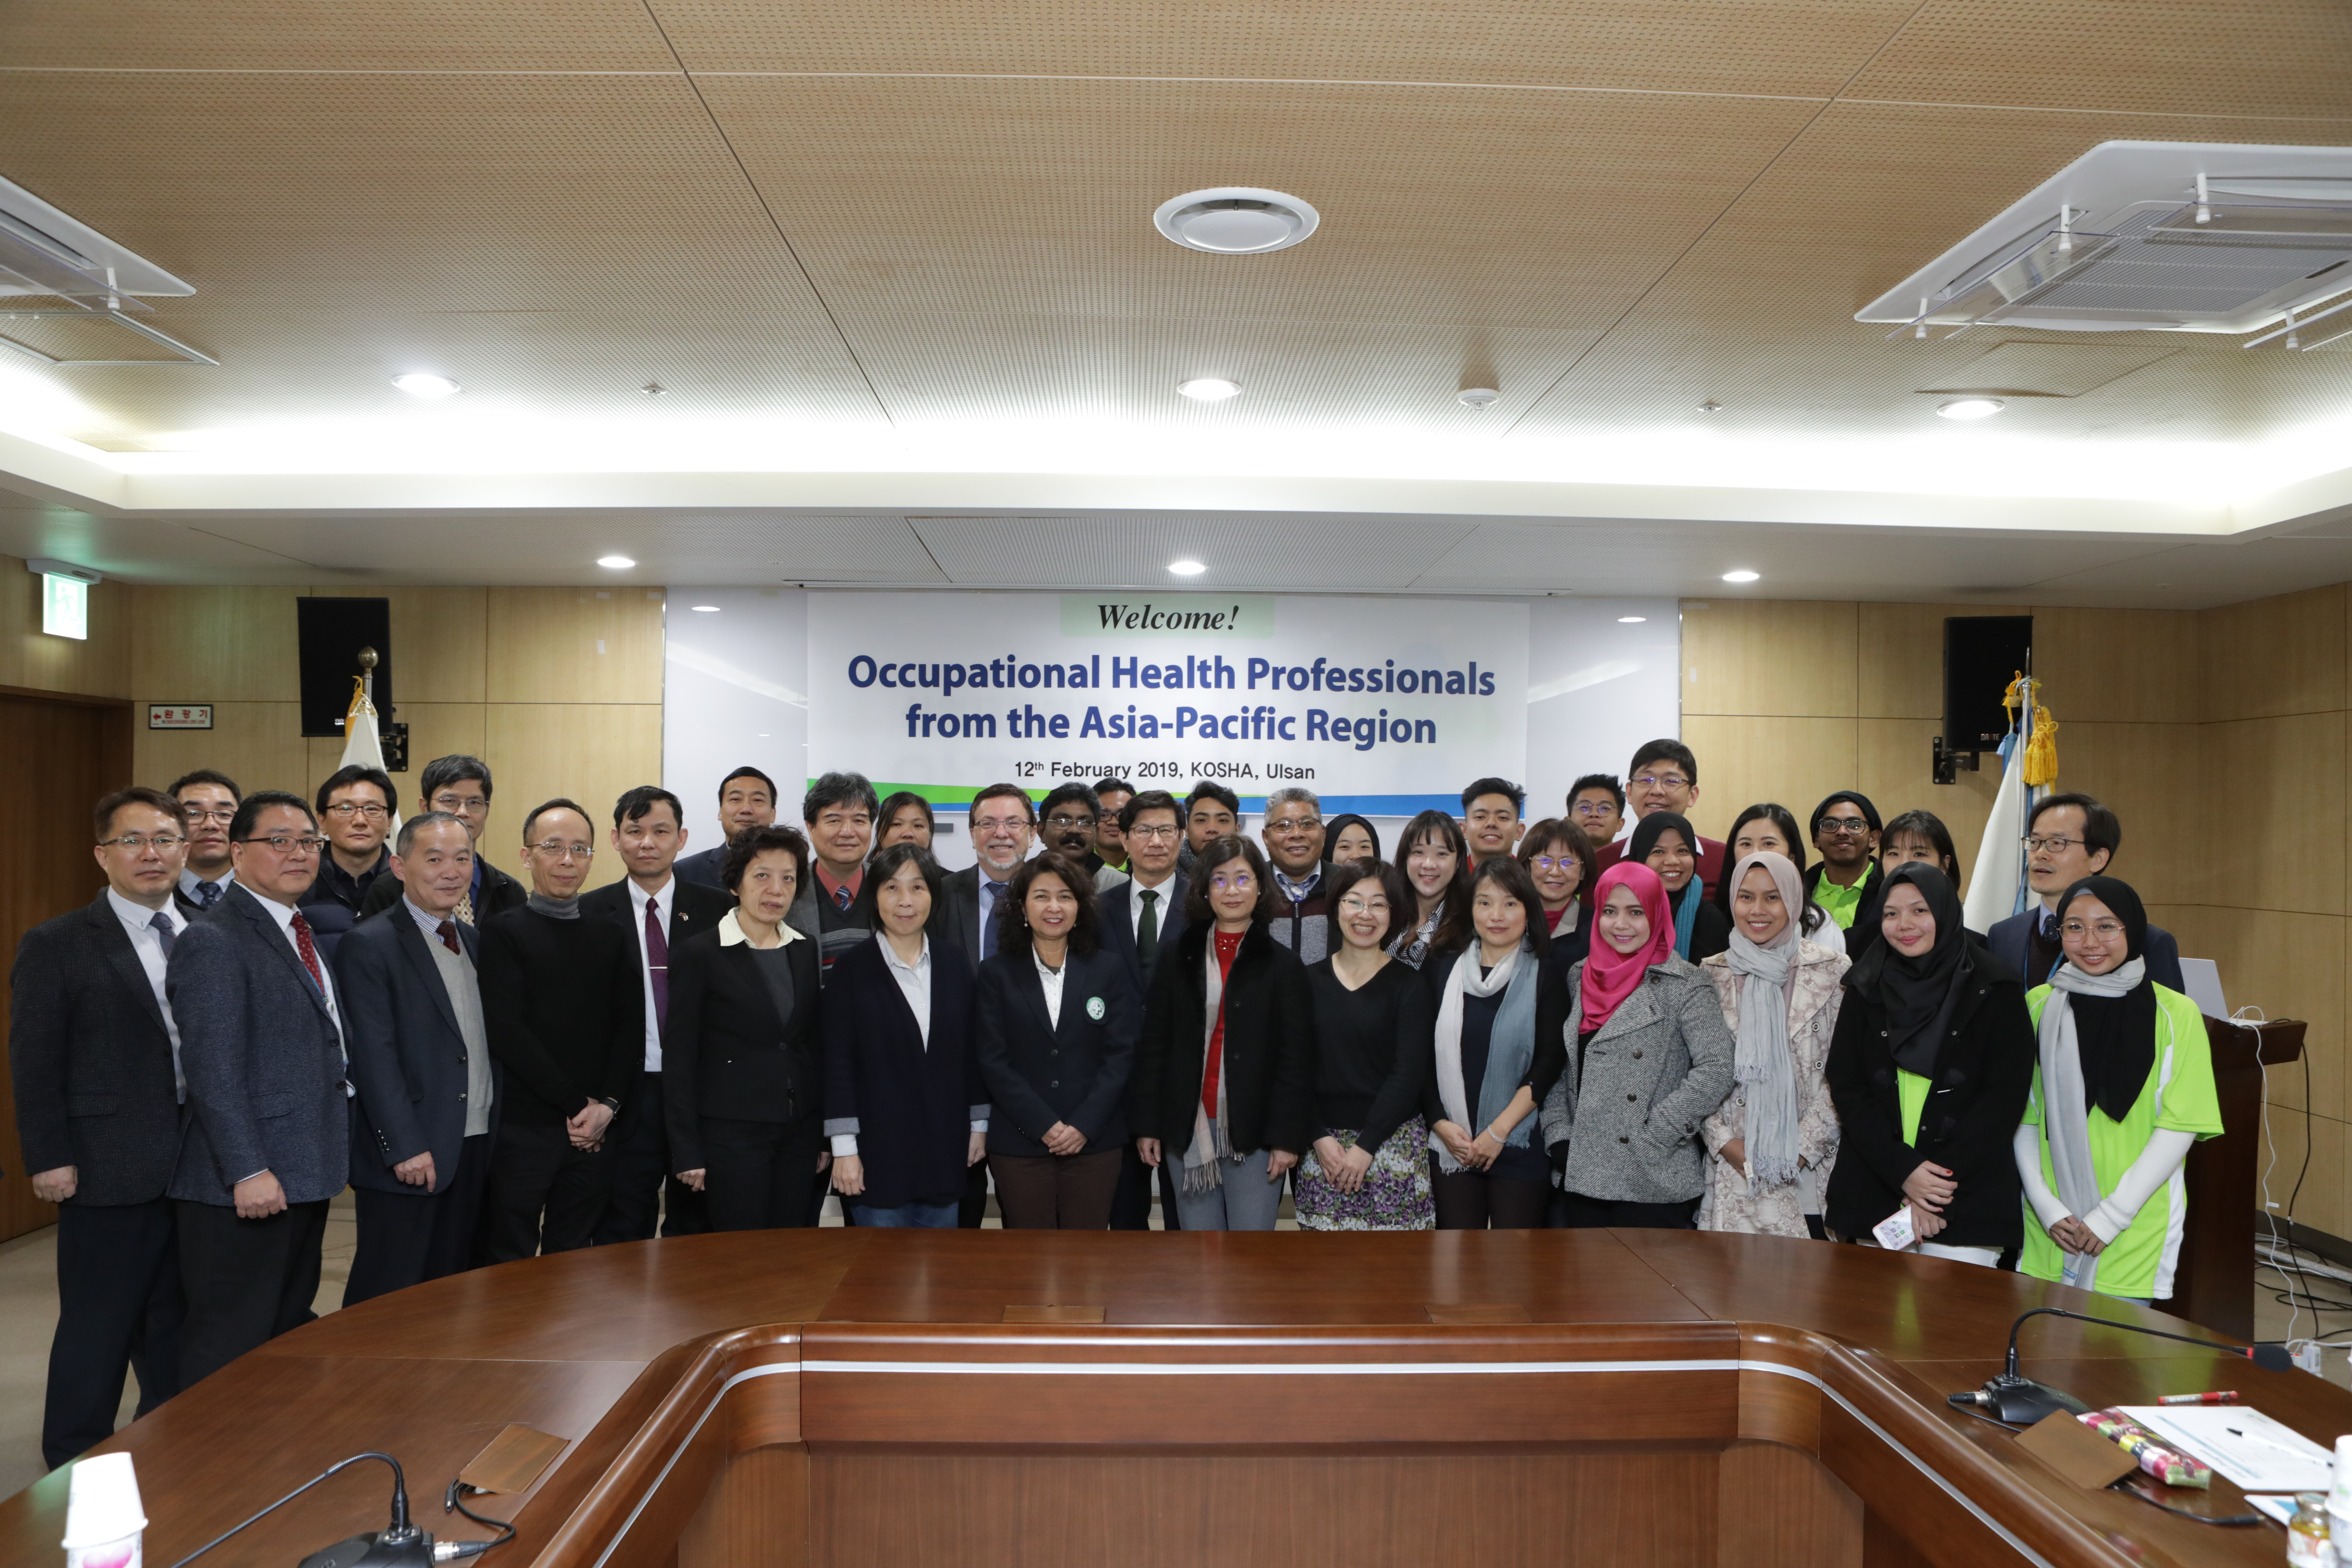 Occupational Safety and Health Professionals from Asian-Pacific Regions